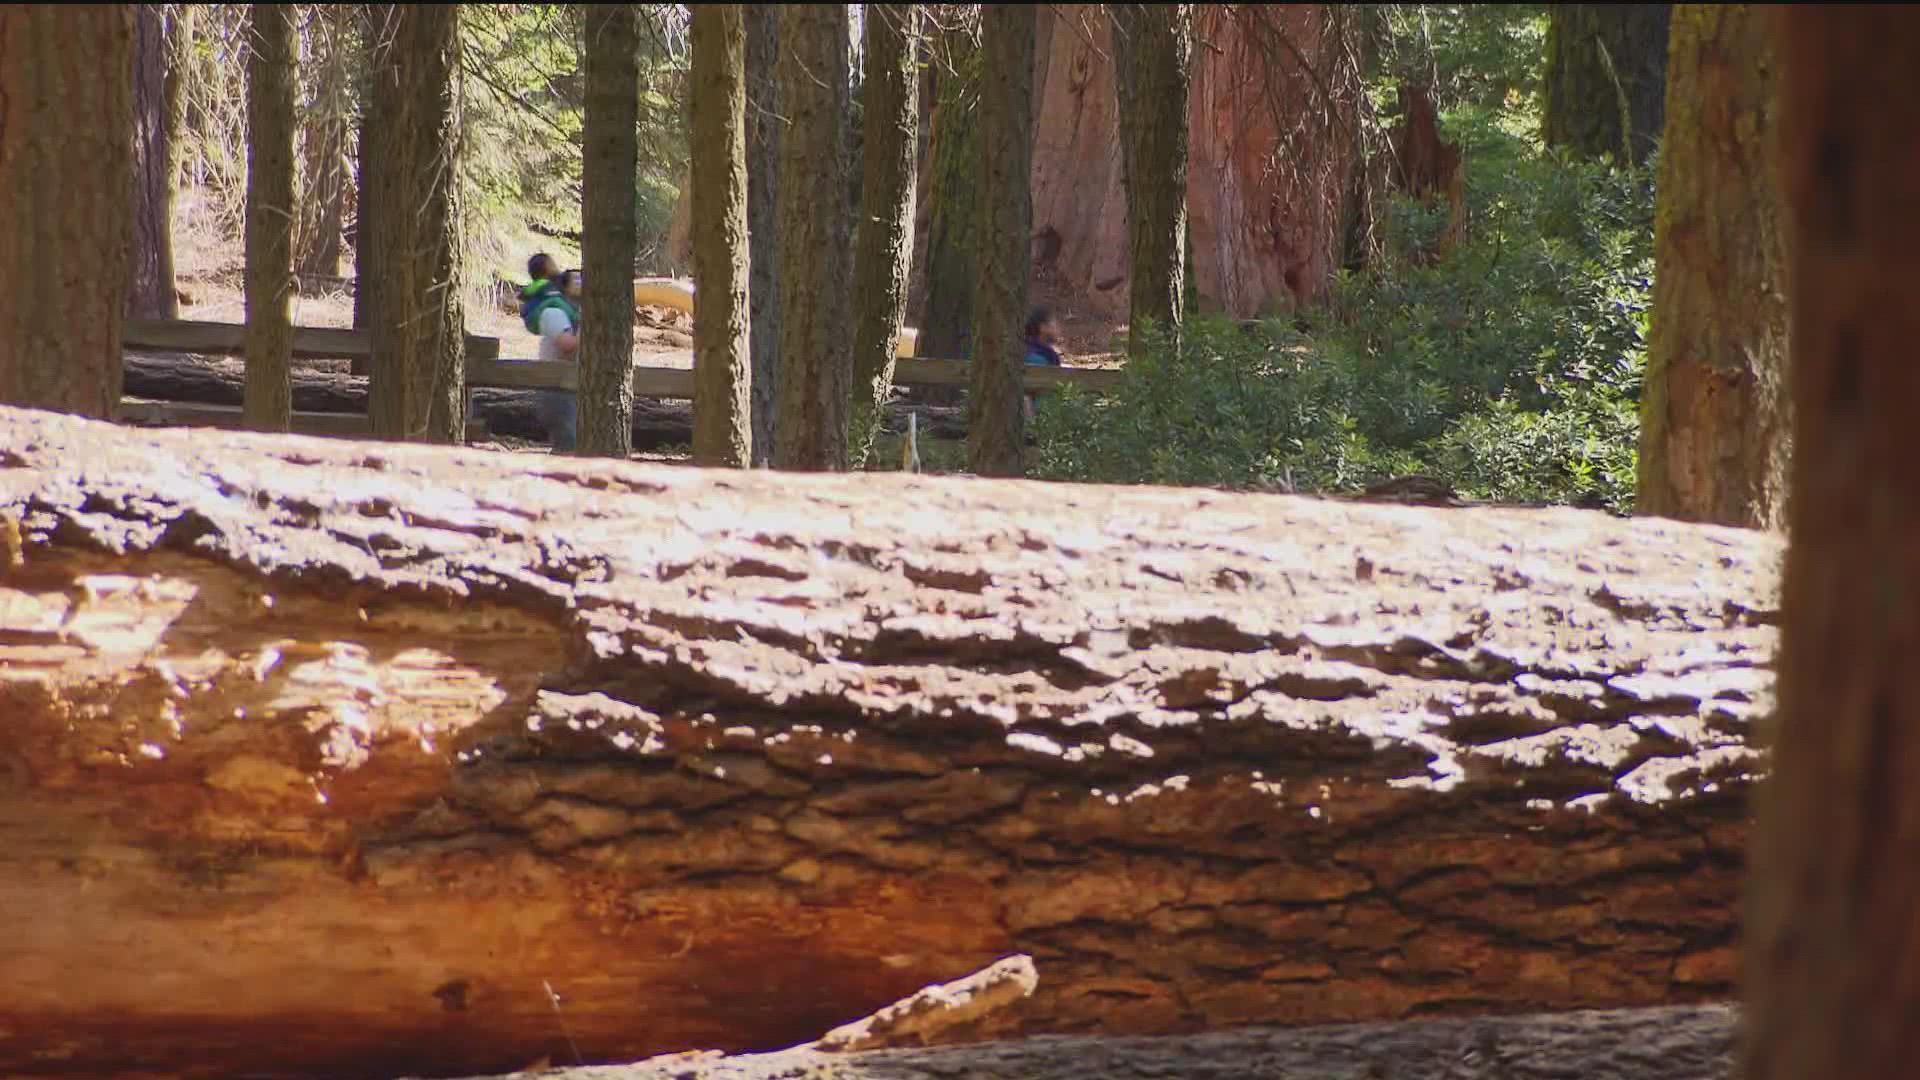 "In 2017, we lost our first Sequoia to a fire and in the last two years, 19% of all the Giant Sequoias to a fire," said Congressman Scott Peters.